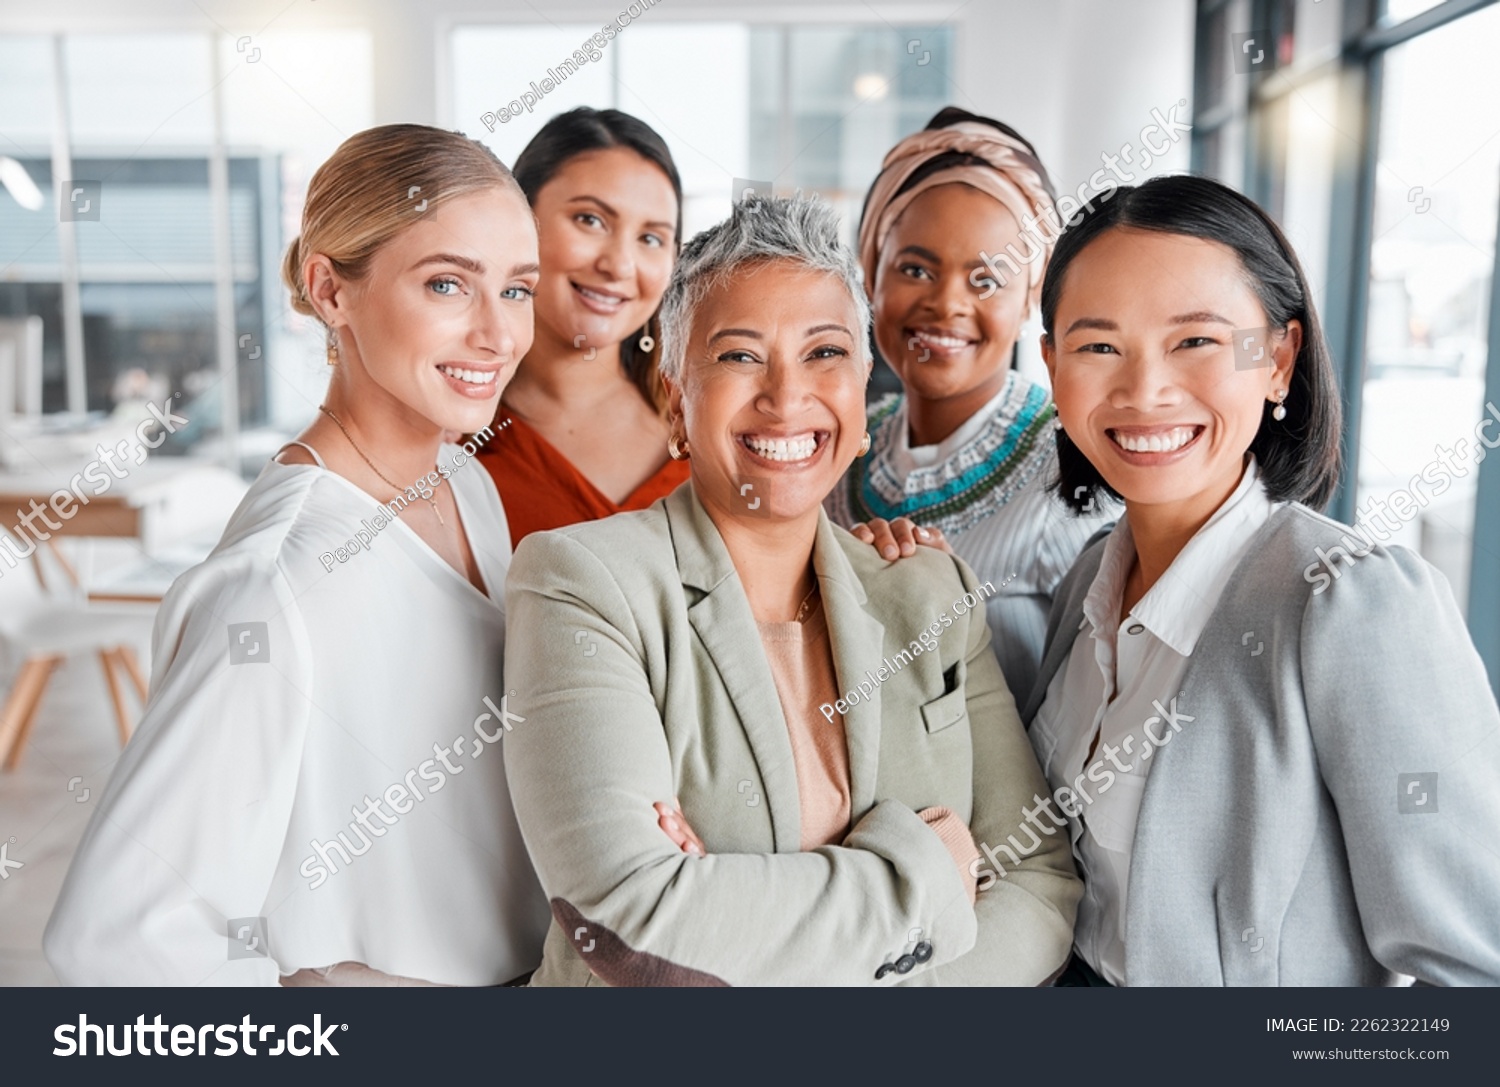 Diversity, portrait selfie and business women teamwork, global success or group empowerment in office leadership. Social media career of asian, black woman and senior people or staff profile picture #2262322149